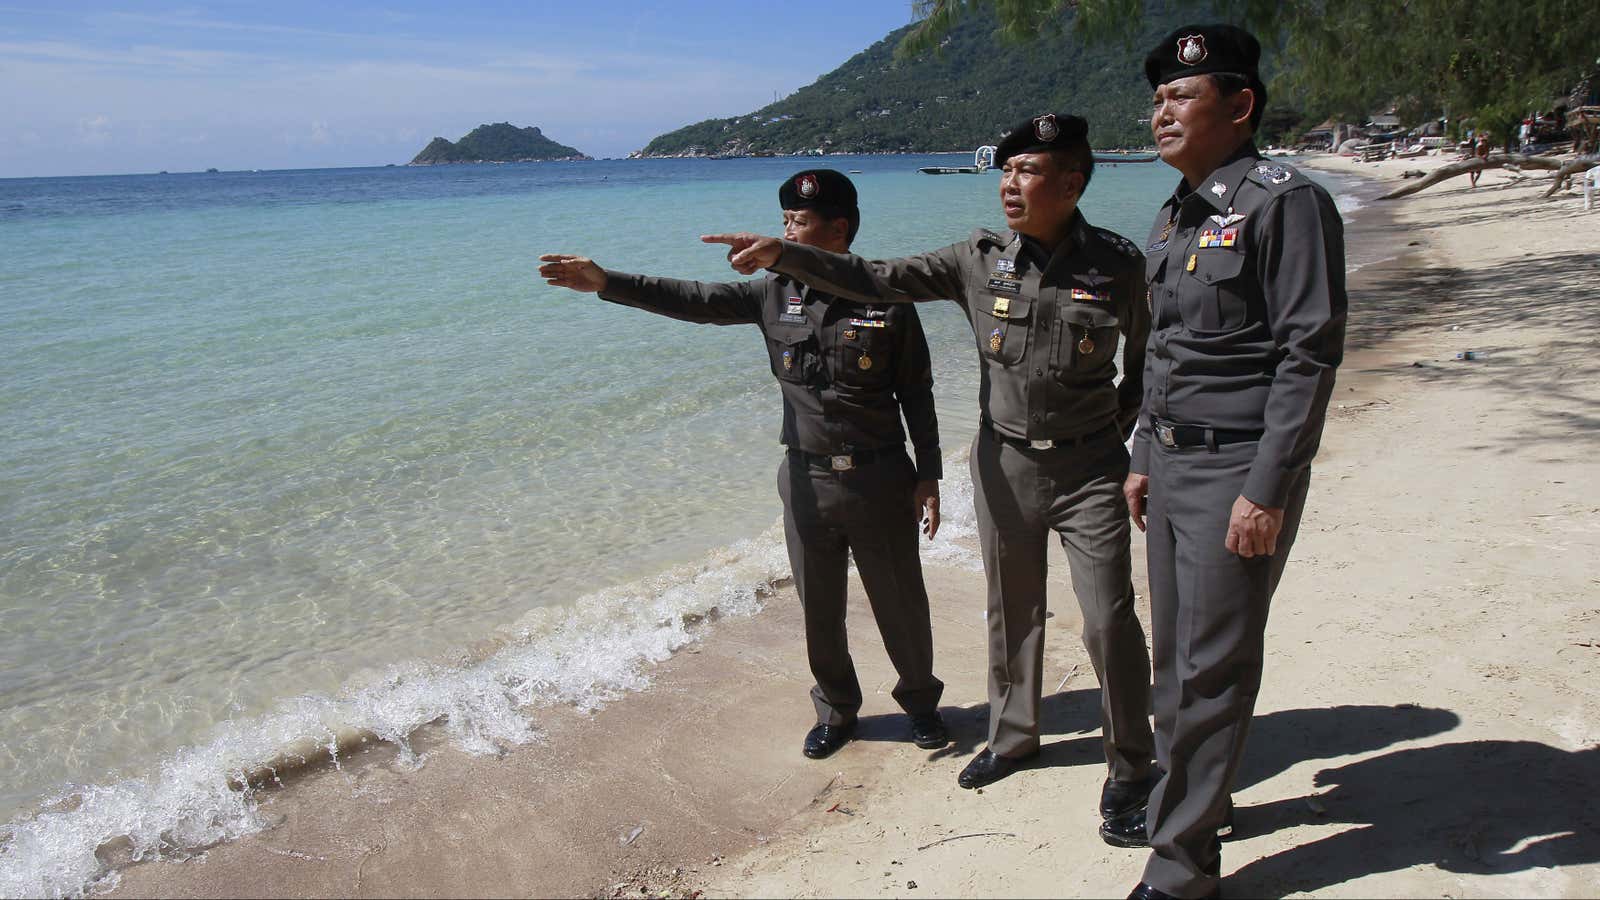 Chief of Royal Thai Police Somyot Pumphanmuang (C) and Royal Thai Police advisor Jarumporn Suramanee (L) look at a beach near the spot where bodies of two killed British tourists were found.